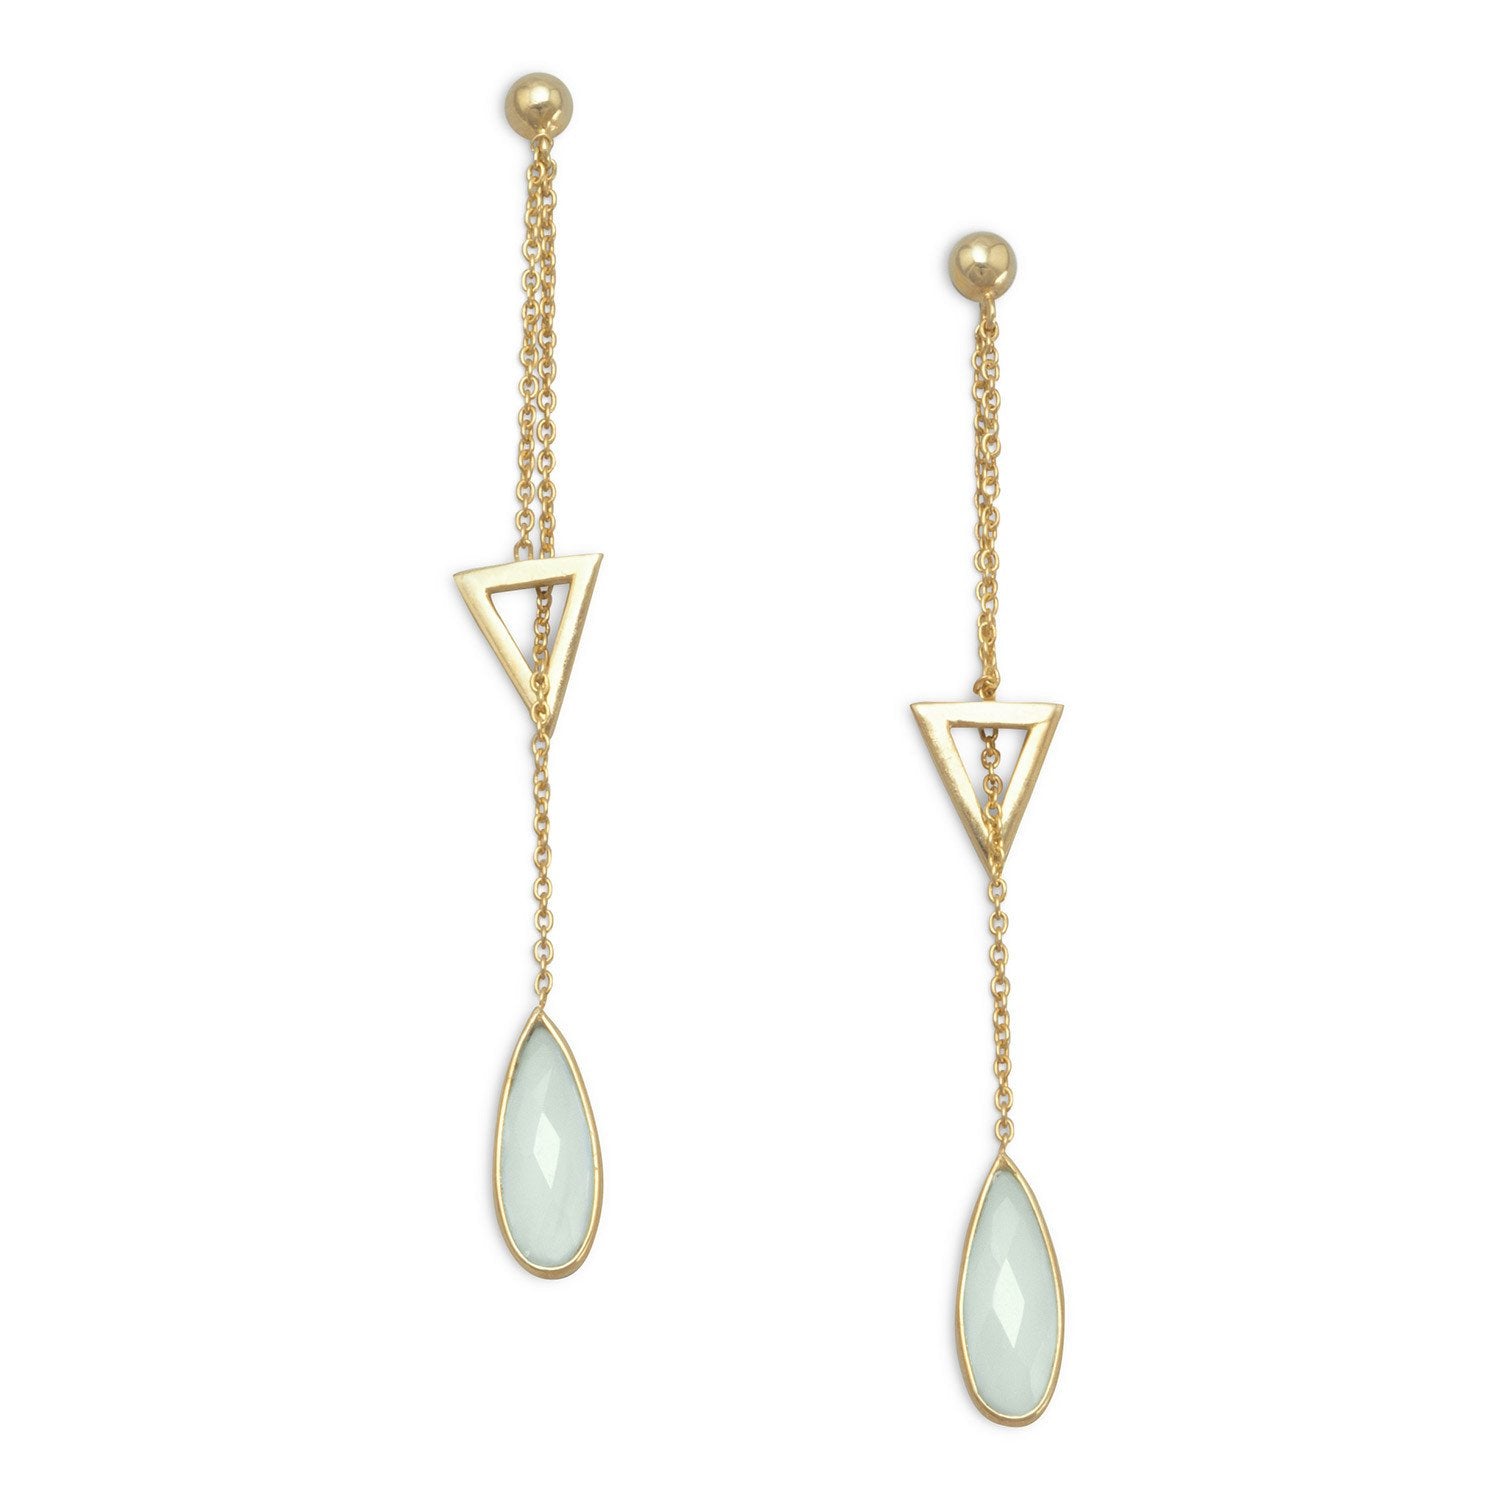 14 Karat Gold Plated Lariat Style Earrings with Chalcedony Drop - Joyeria Lady